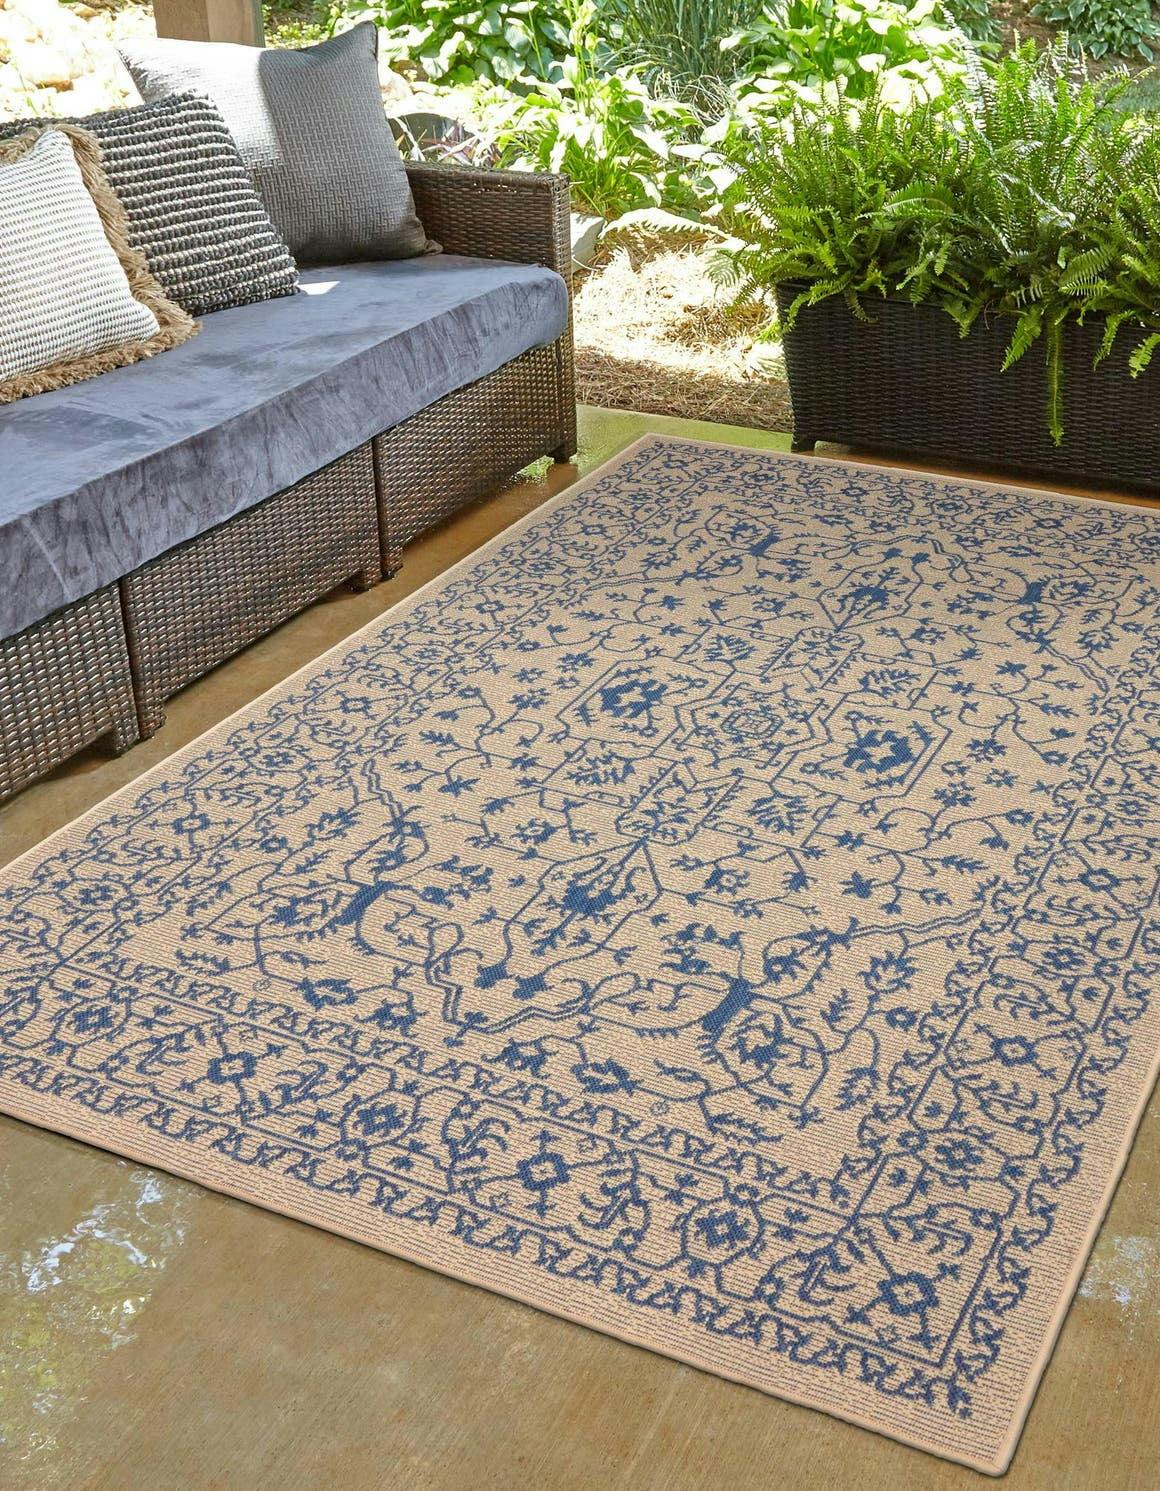 Beige and Blue Synthetic Rectangular Outdoor Rug, Stain-Resistant and Easy Care